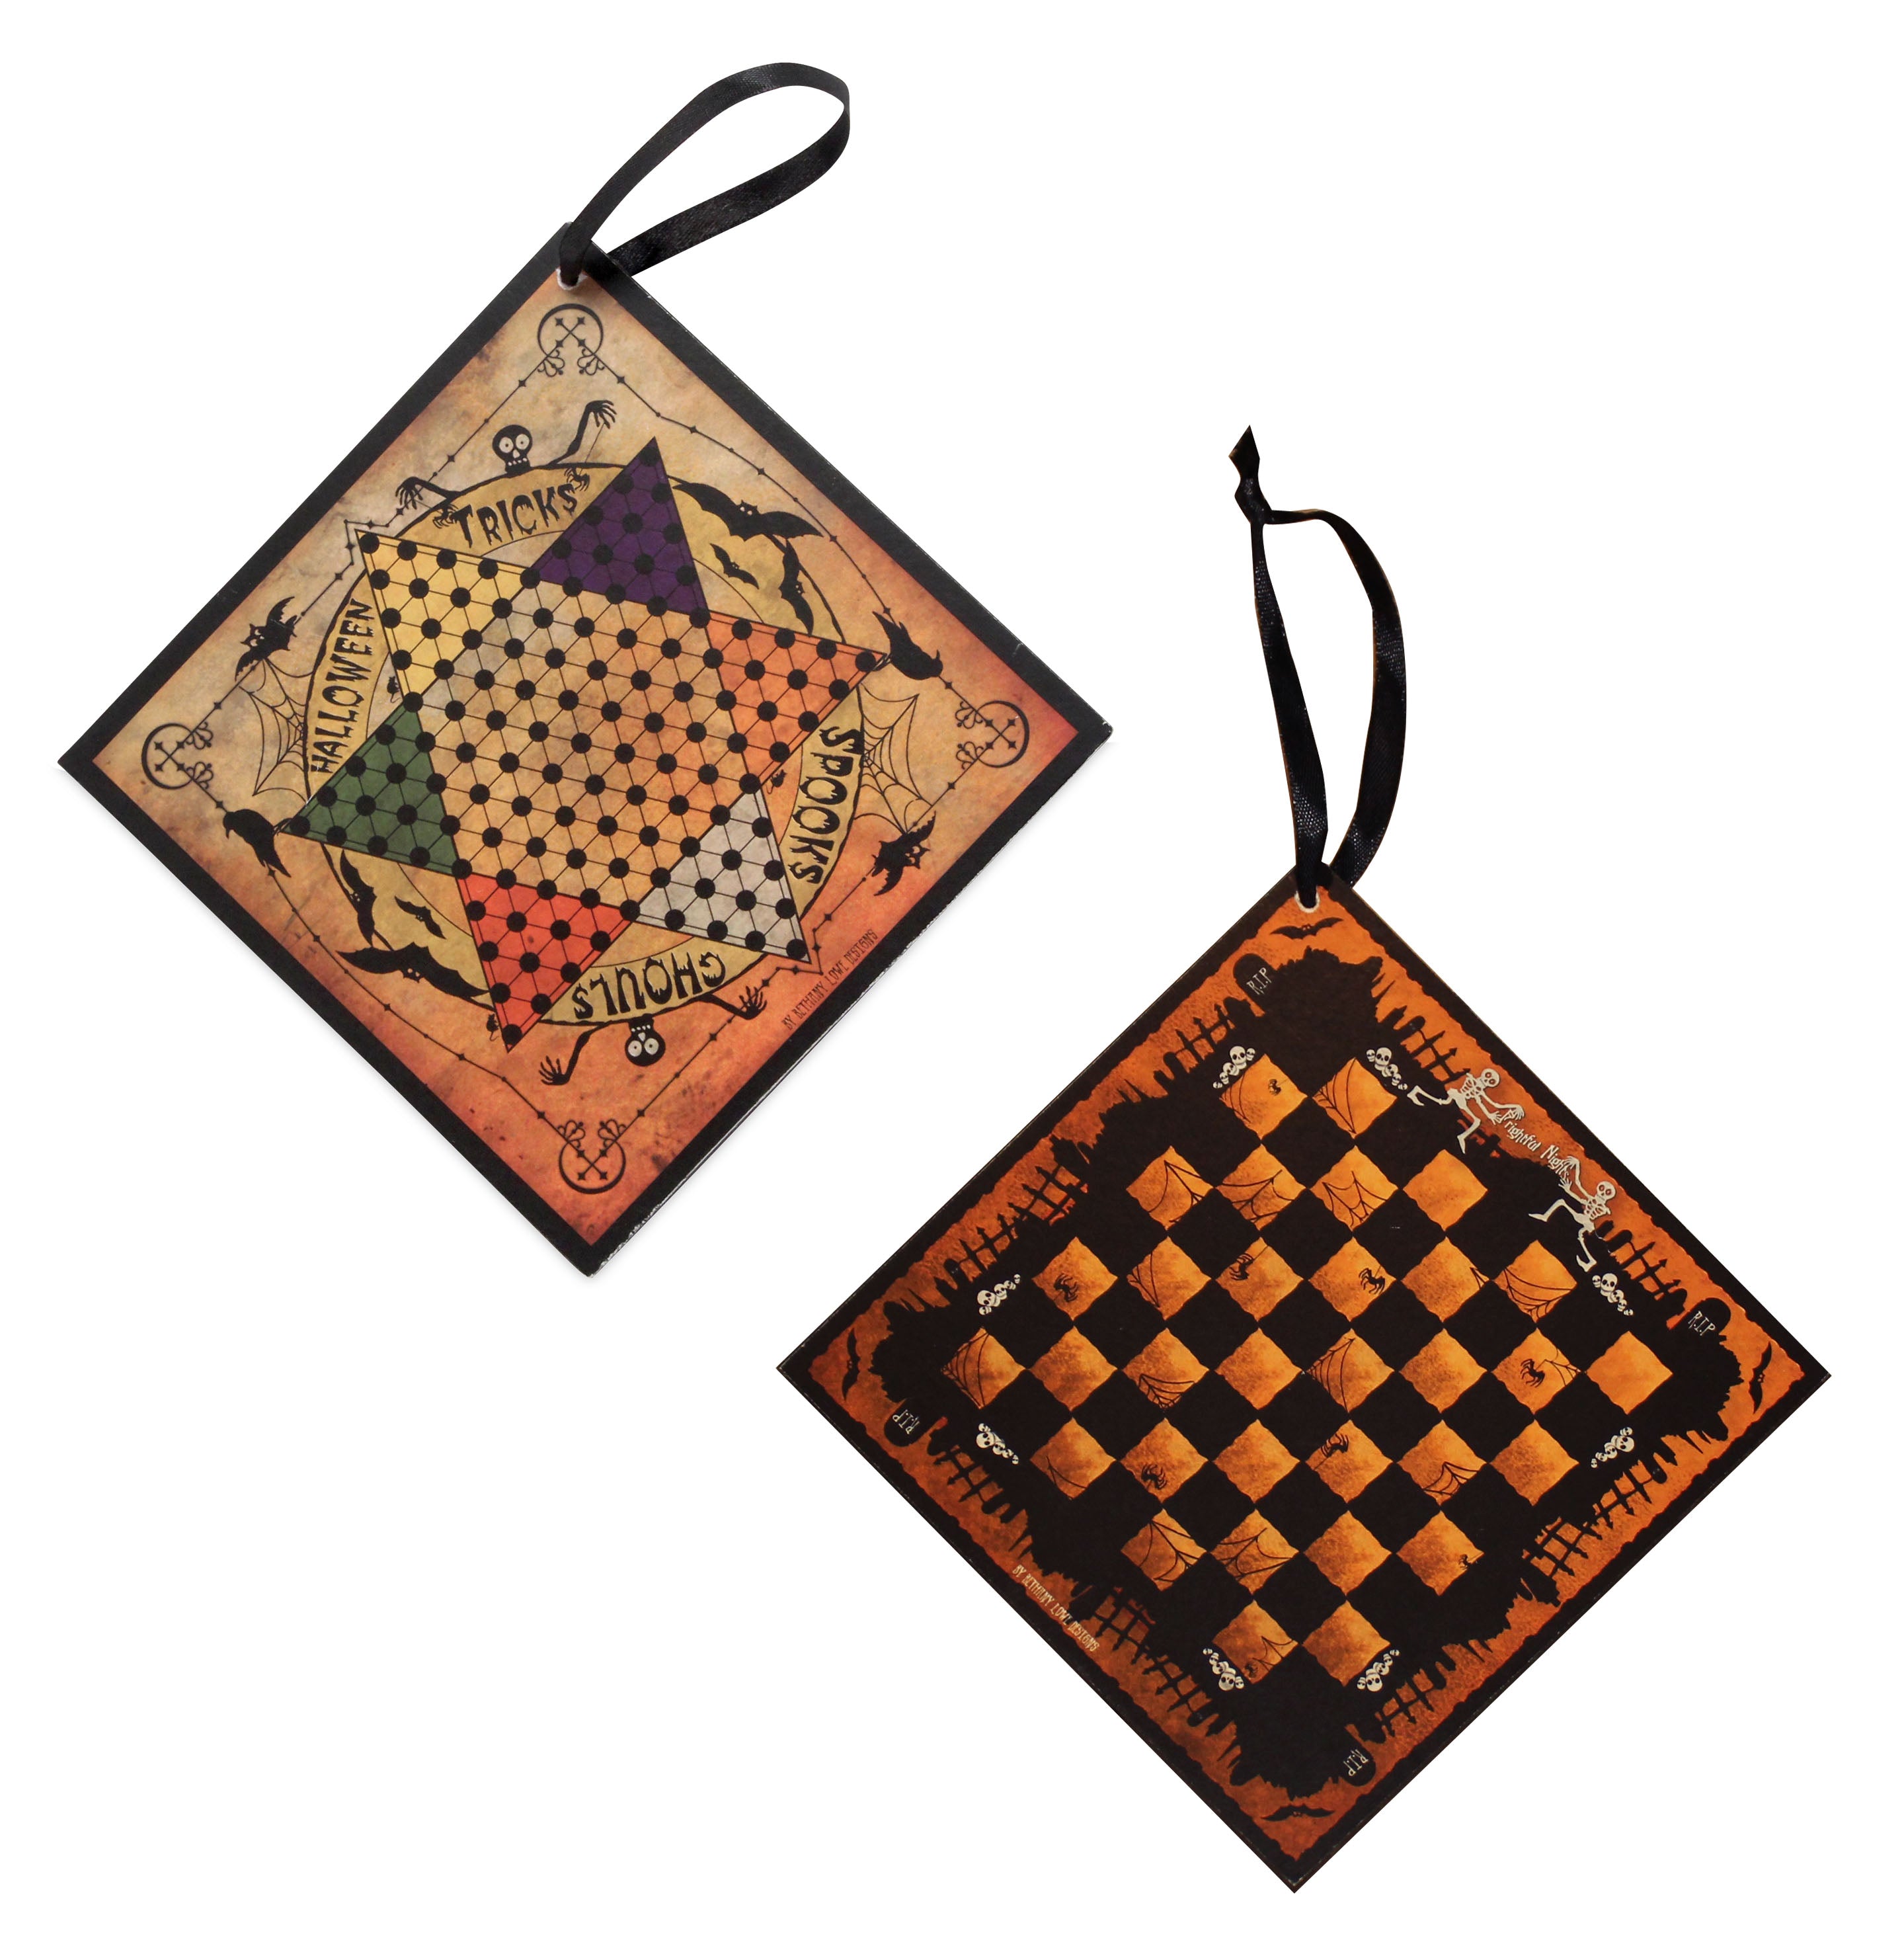 Halloween Gameboard Ornaments by Bethany Lowe